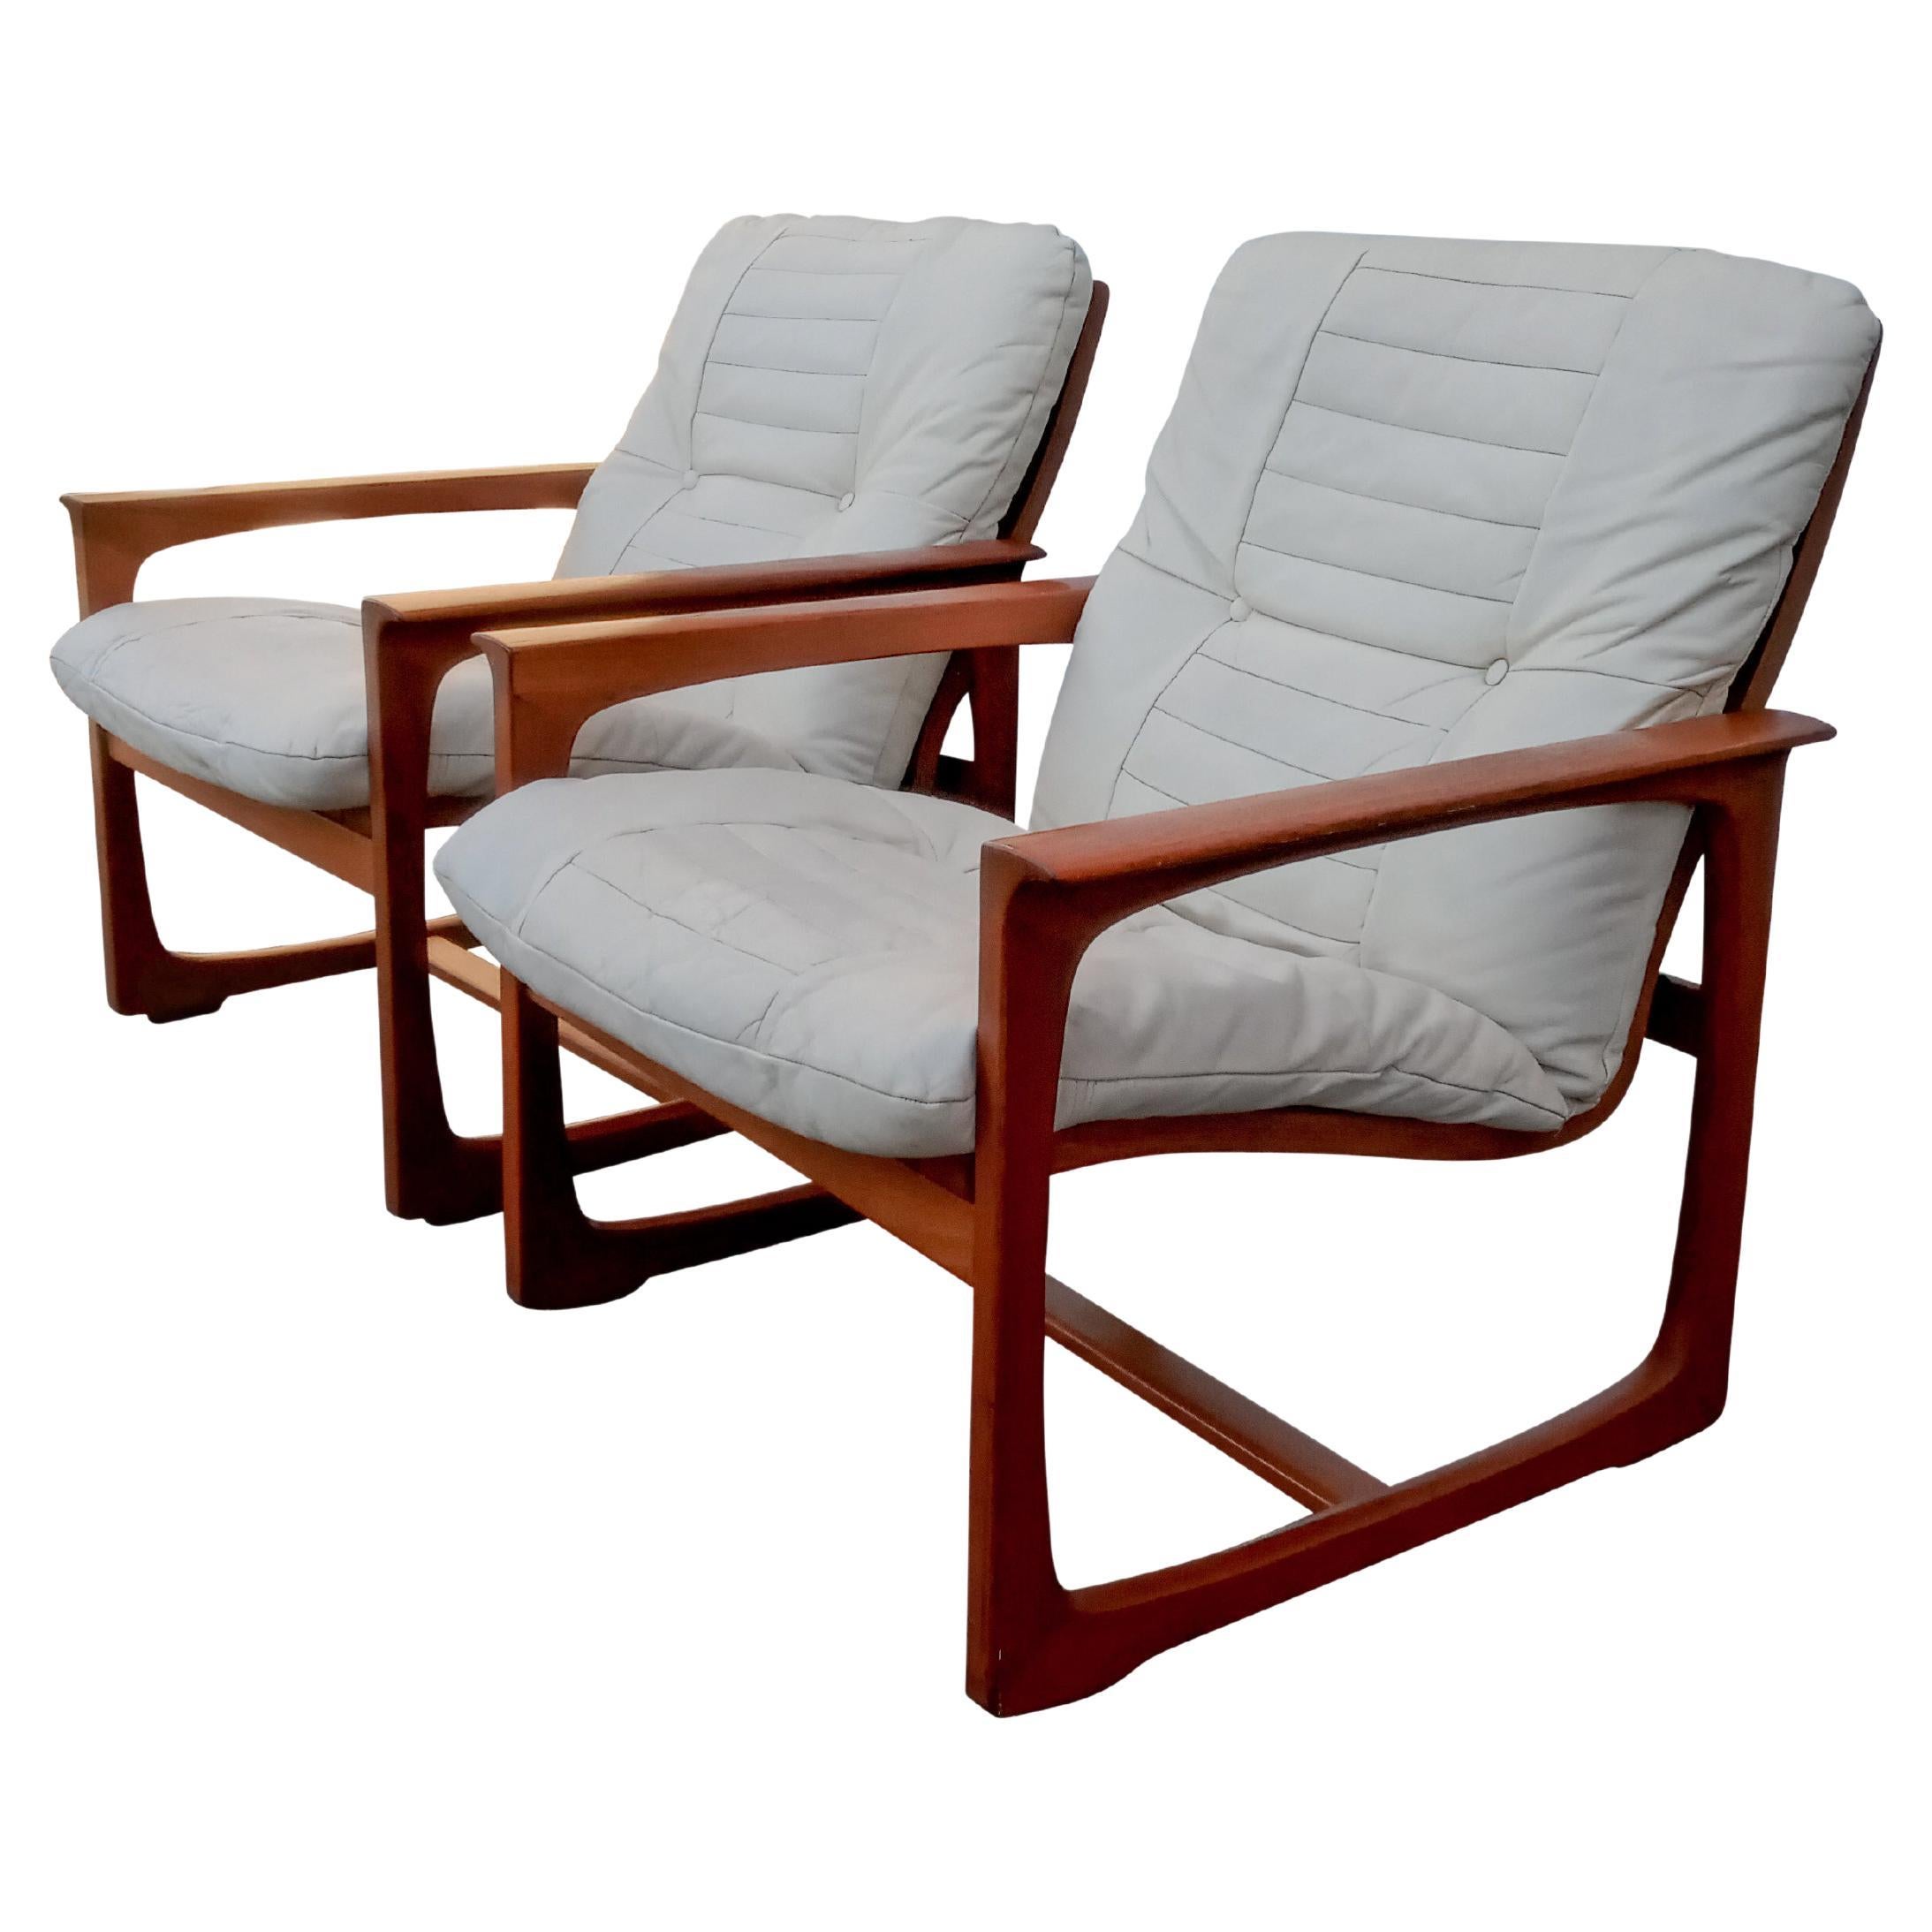 1970s Scandinavian Pair Lounge Chairs, Lied Mobler Norway, Teak & Leather For Sale